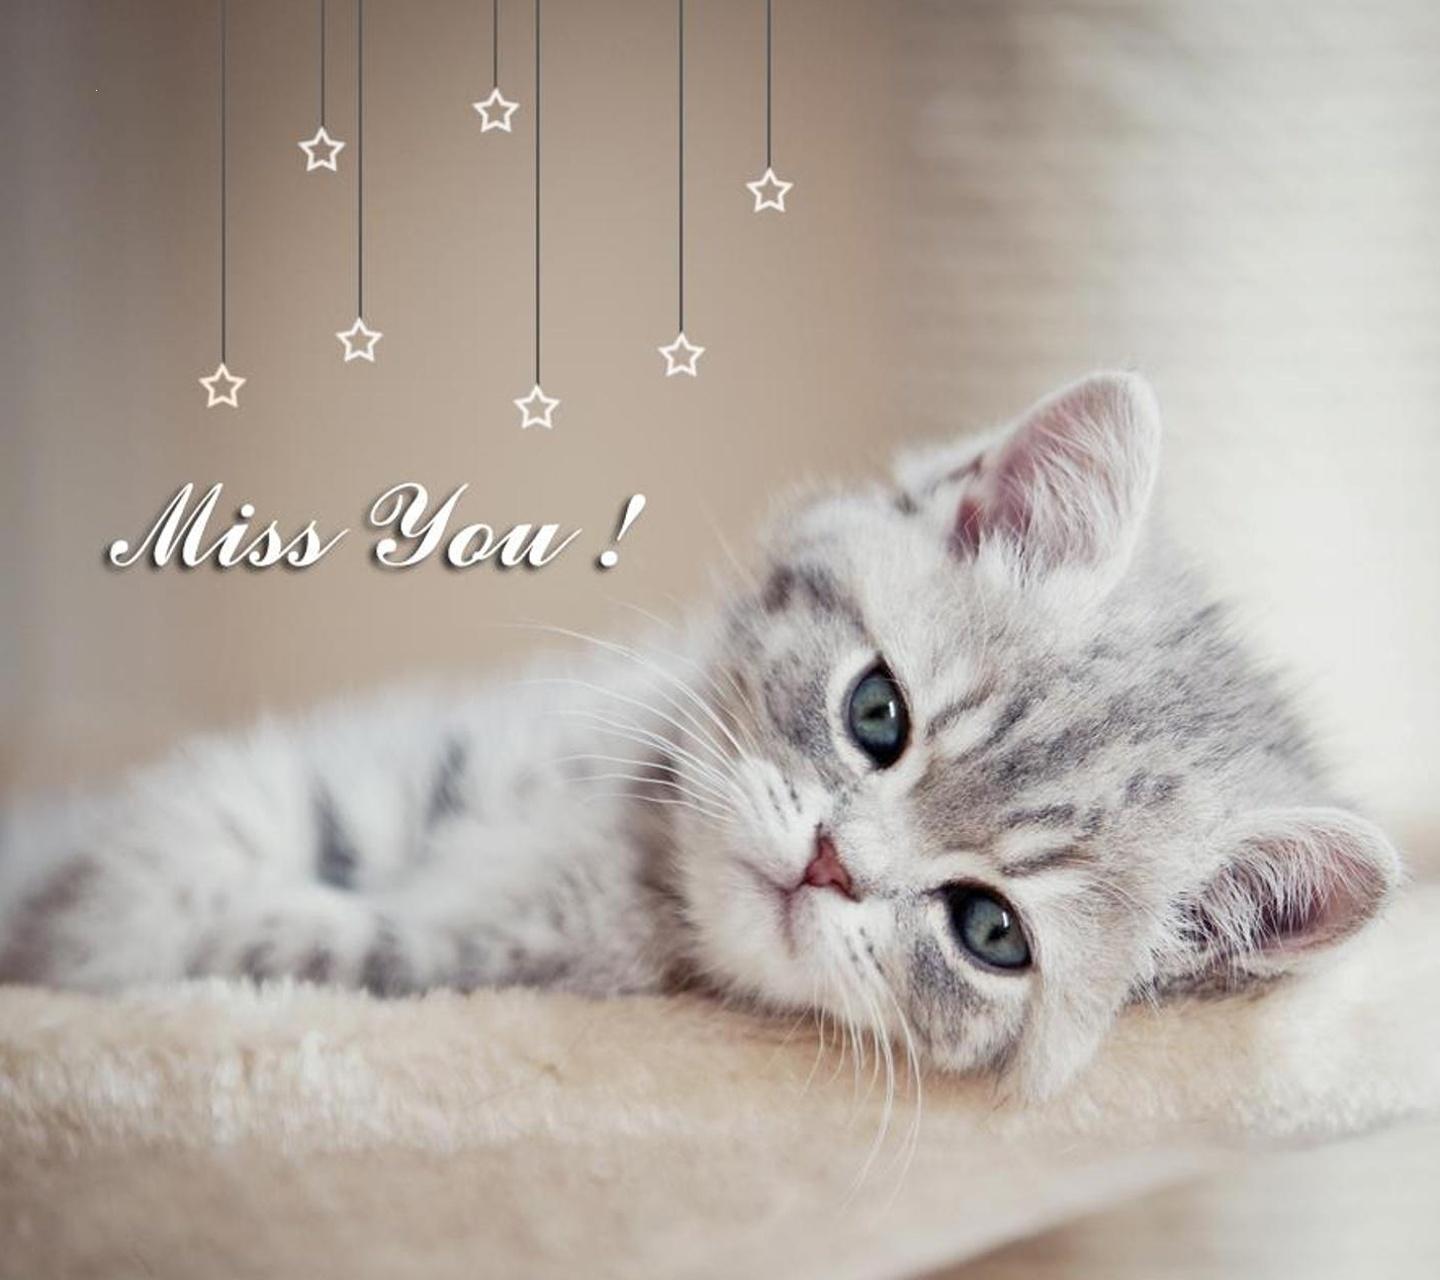 Sweet Cat Miss You - Baby Kittens White And Grey , HD Wallpaper & Backgrounds